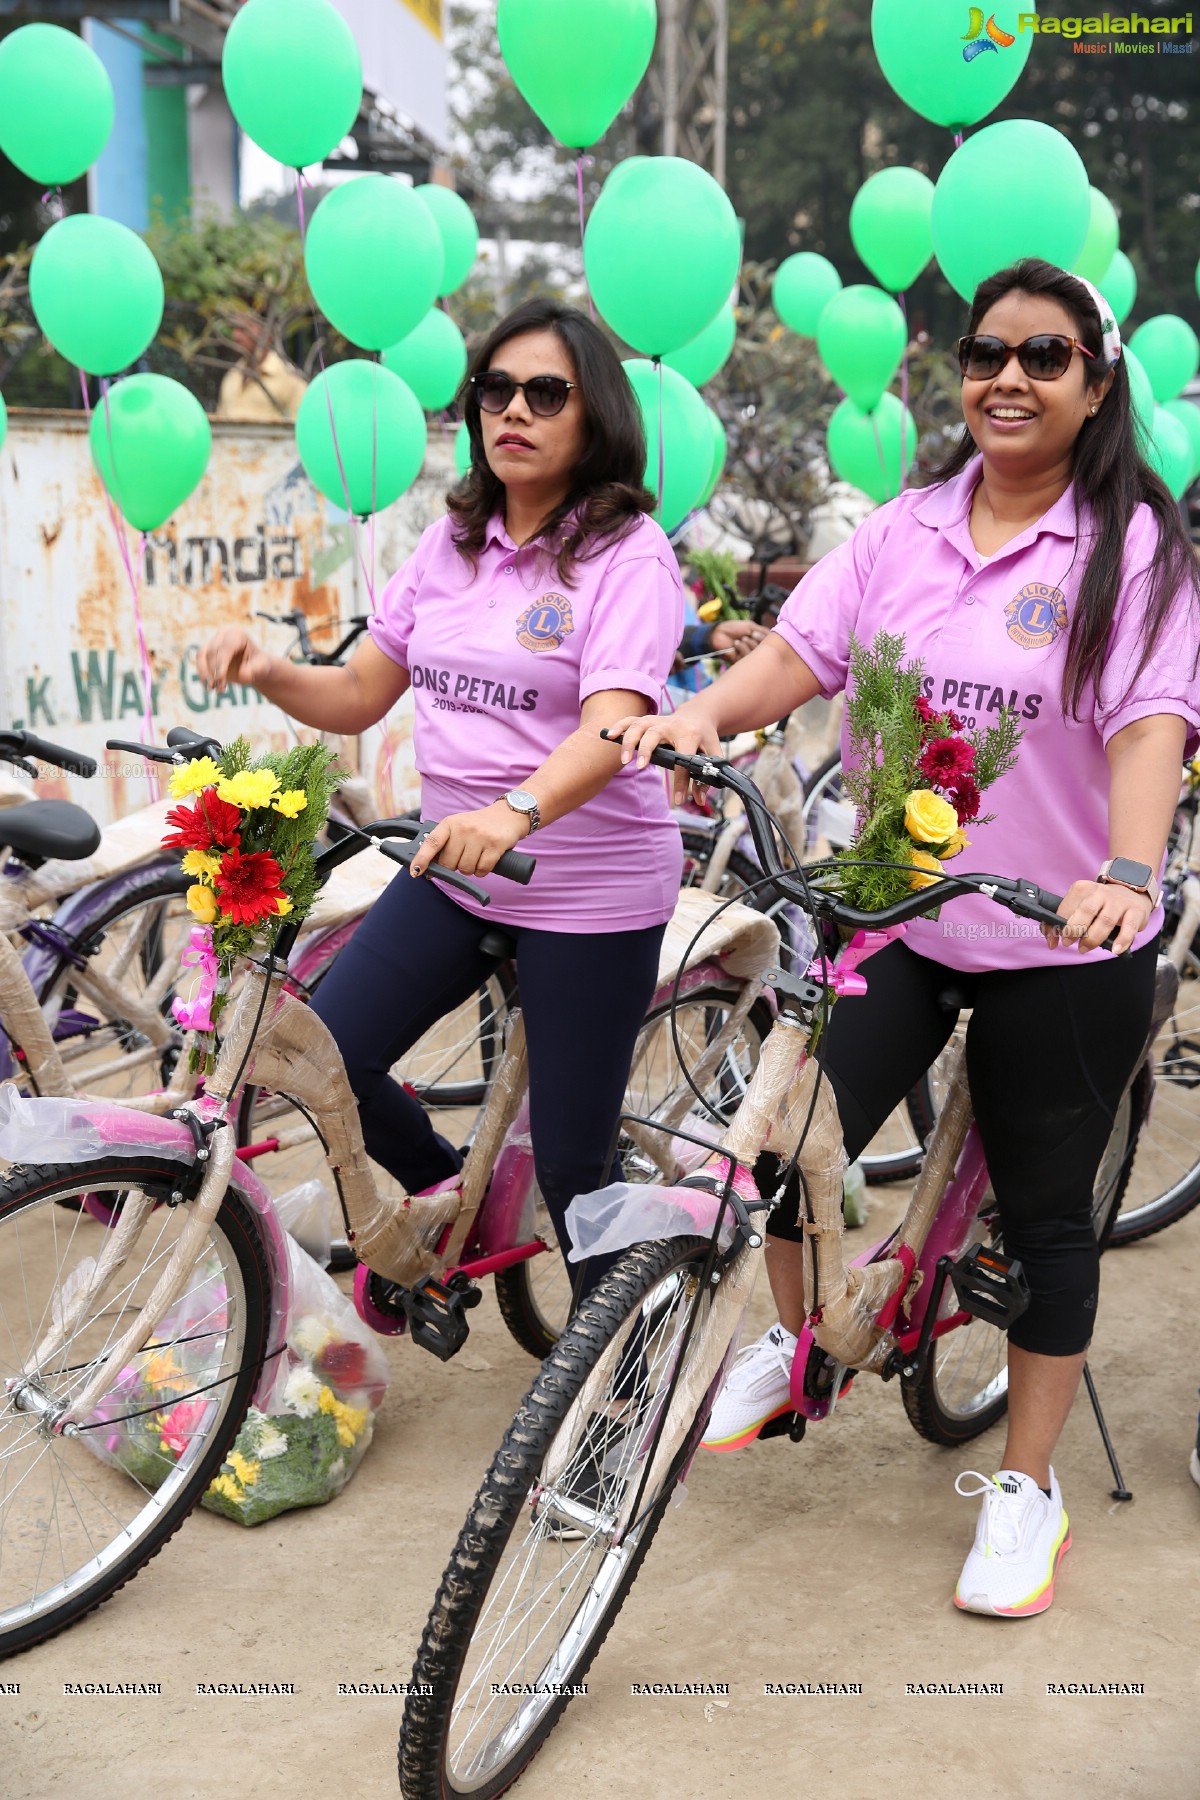 Environmental Awareness Rally By Lions Ladies Club at KBR Park Hyderabad